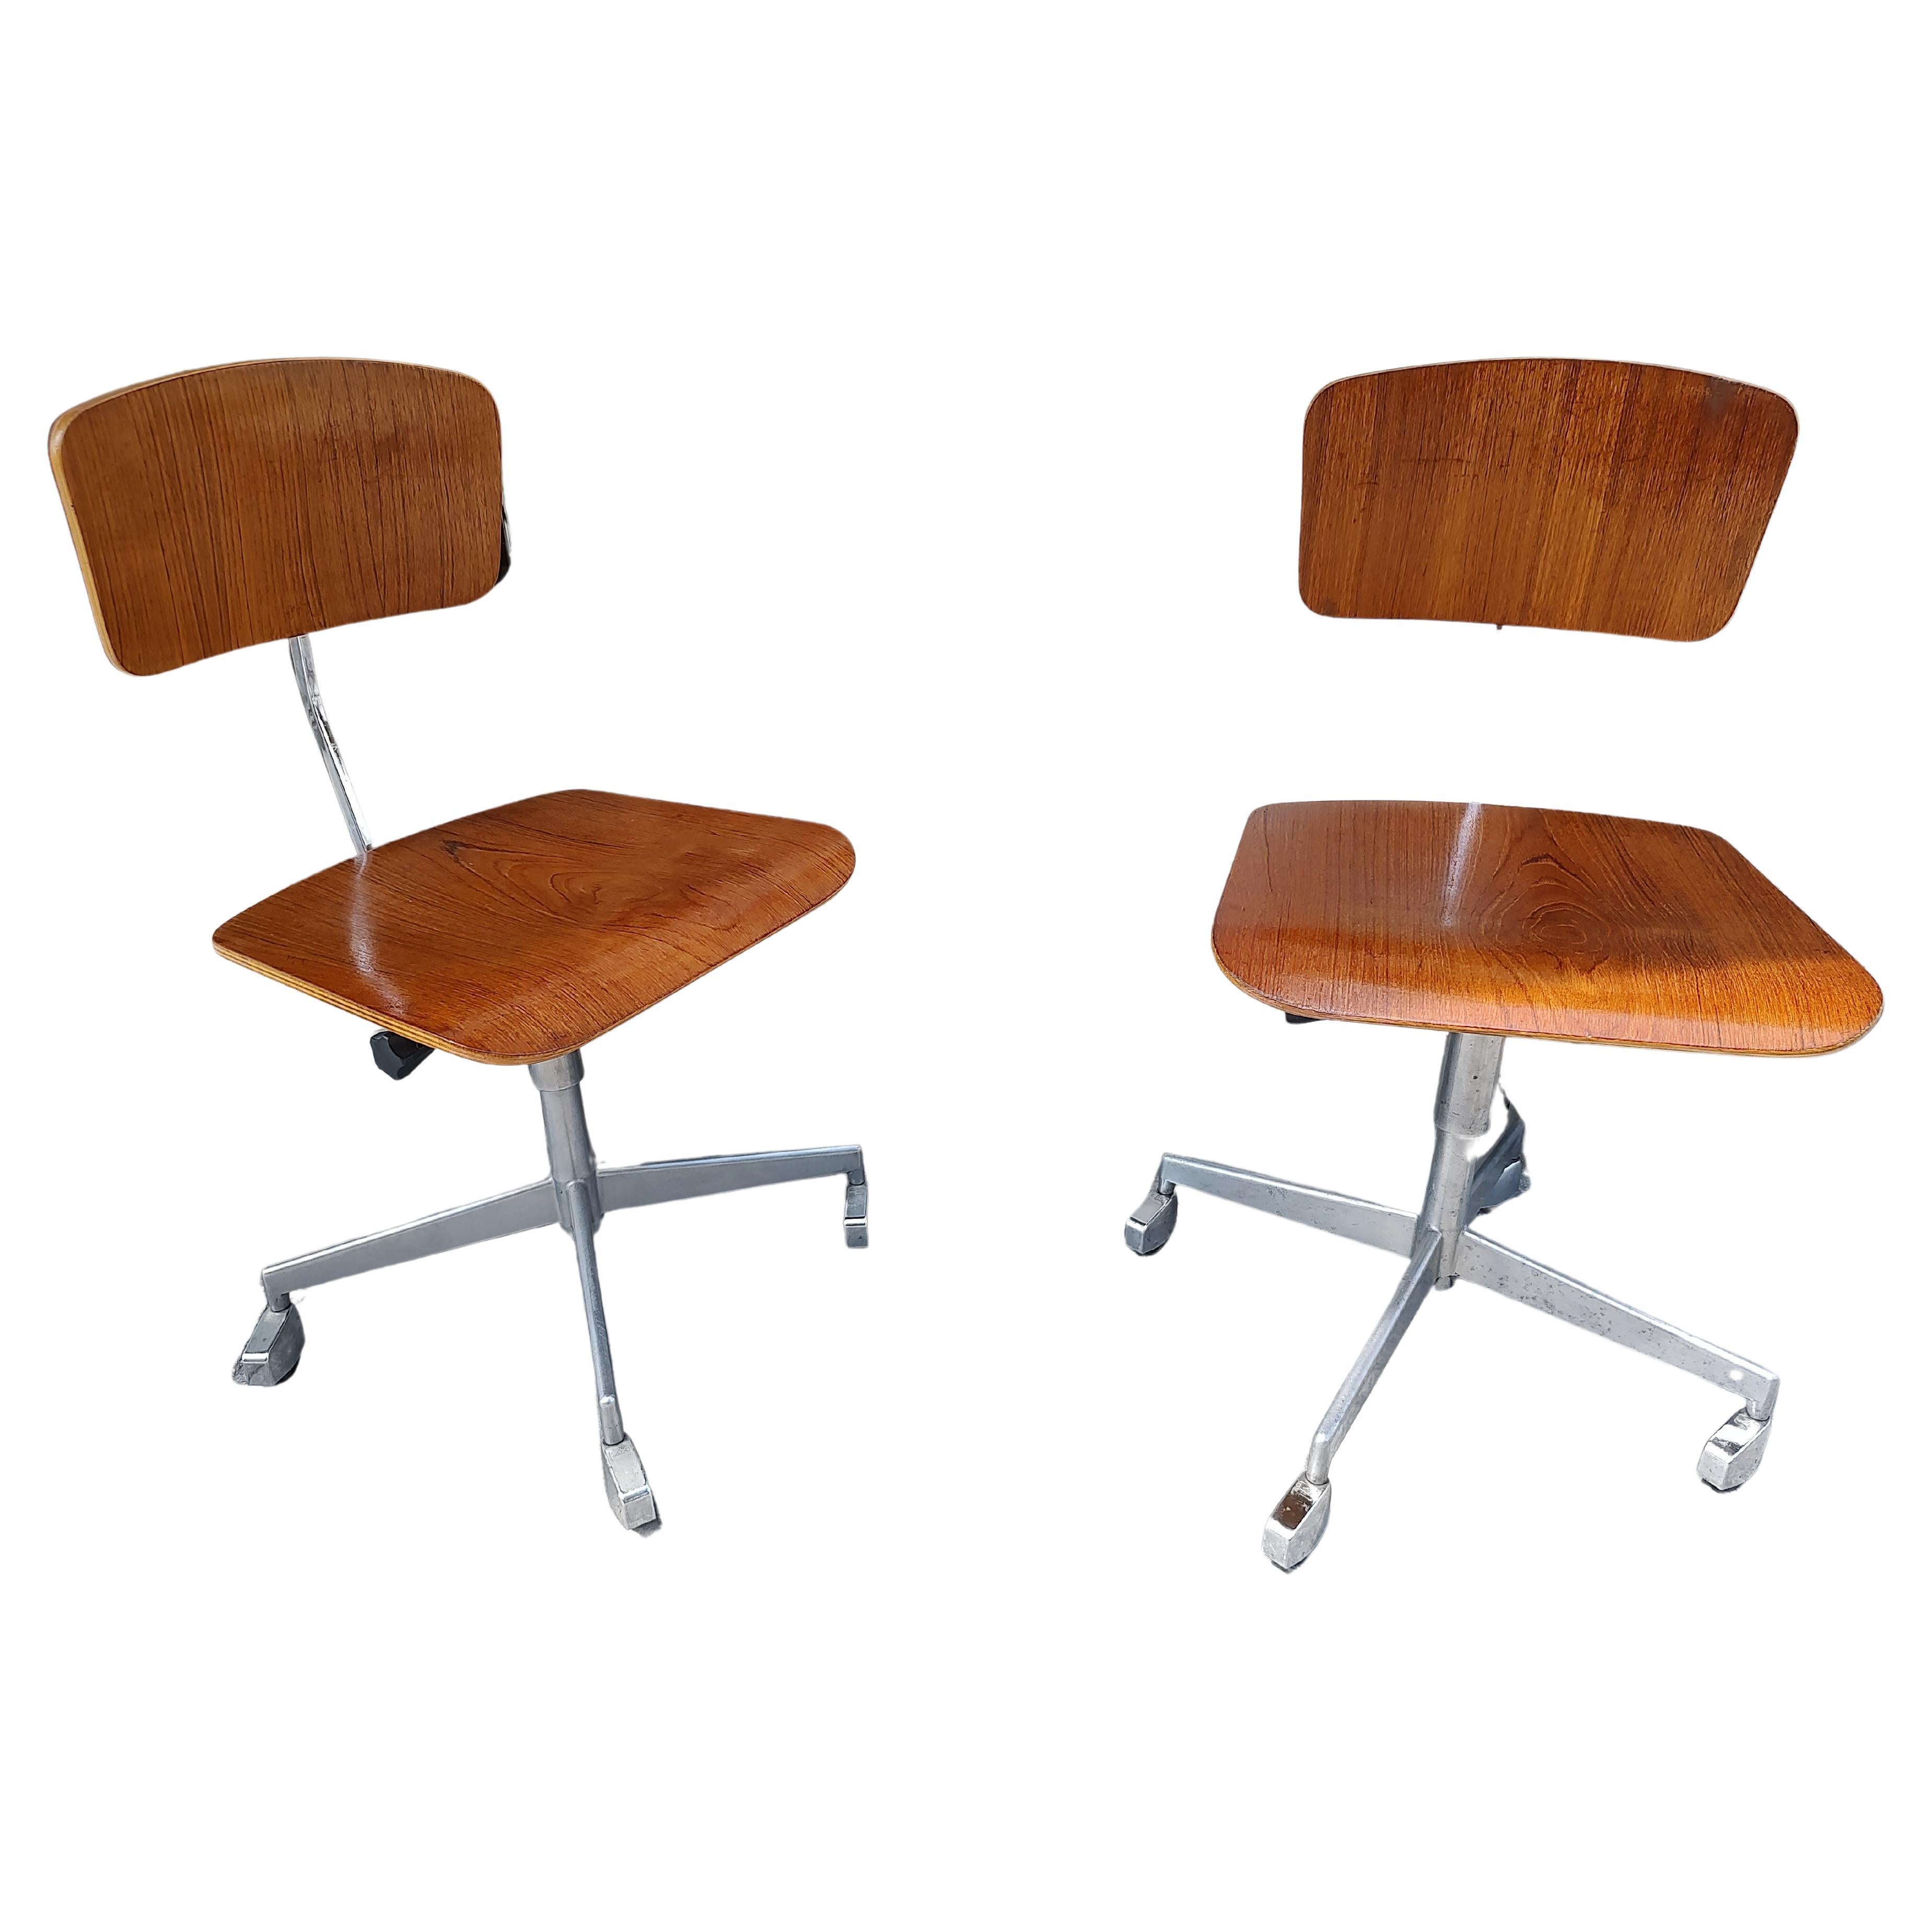 Fabulous pair of Mid-Century Modern sculptural Scandinavian walnut desk chairs by Jorgen Rasmussen for Labofa, c1955. Bent walnut plywood in original finish and in excellent vintage condition with minimal wear. Seat and back adjust in height to fit